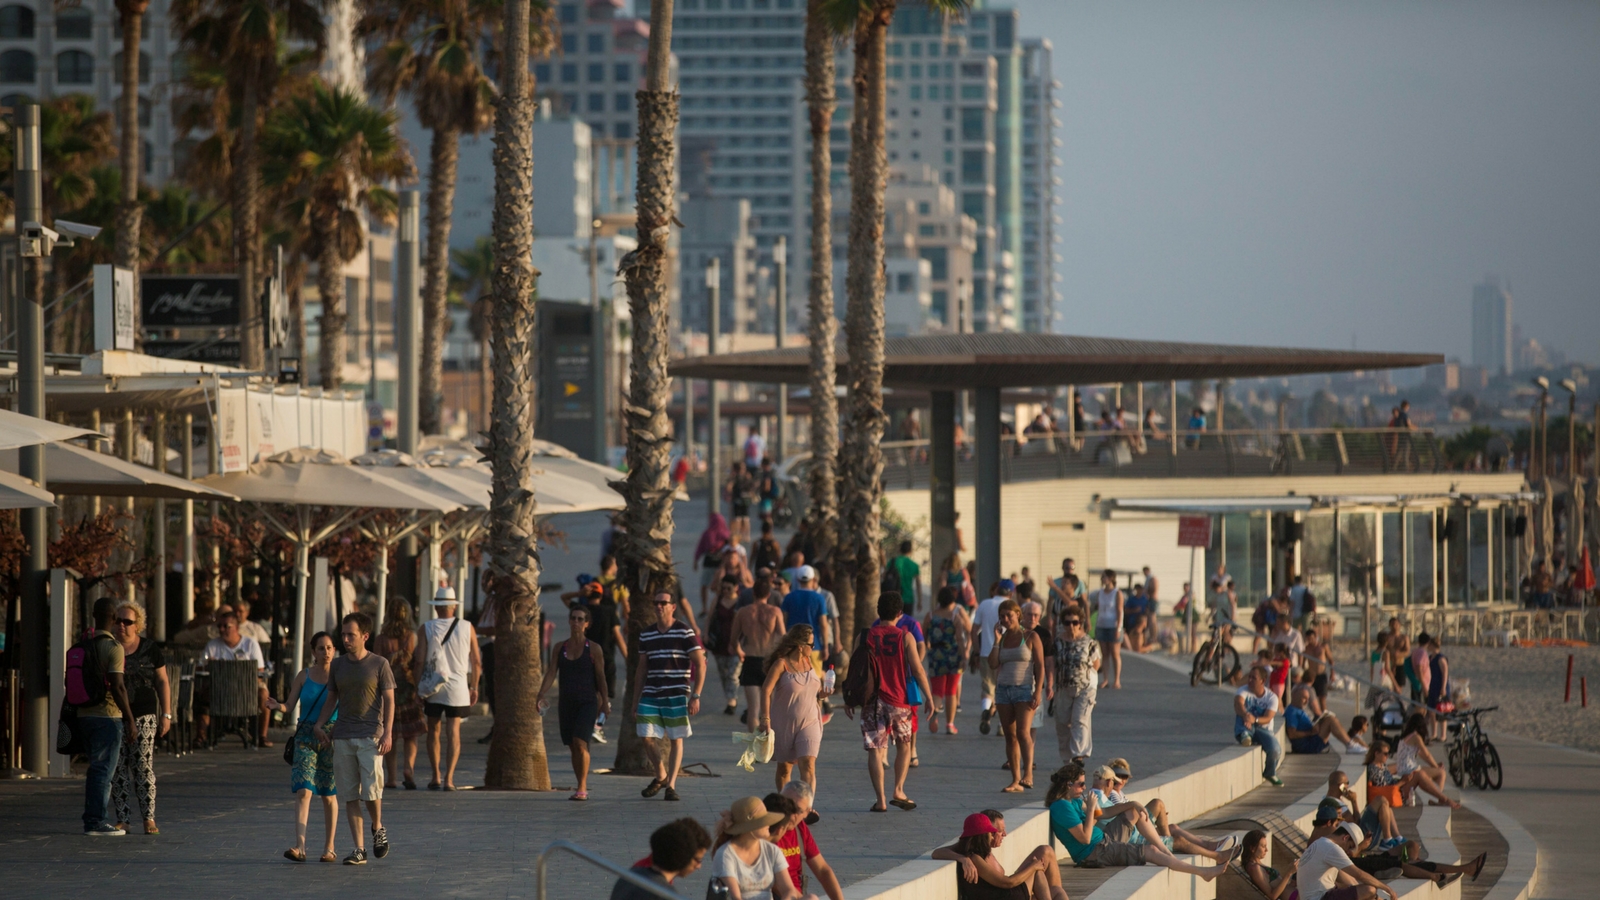 Israelis and tourists walk on the promenade by the beach in Tel Aviv. Photo by Miriam Alster/FLASH90